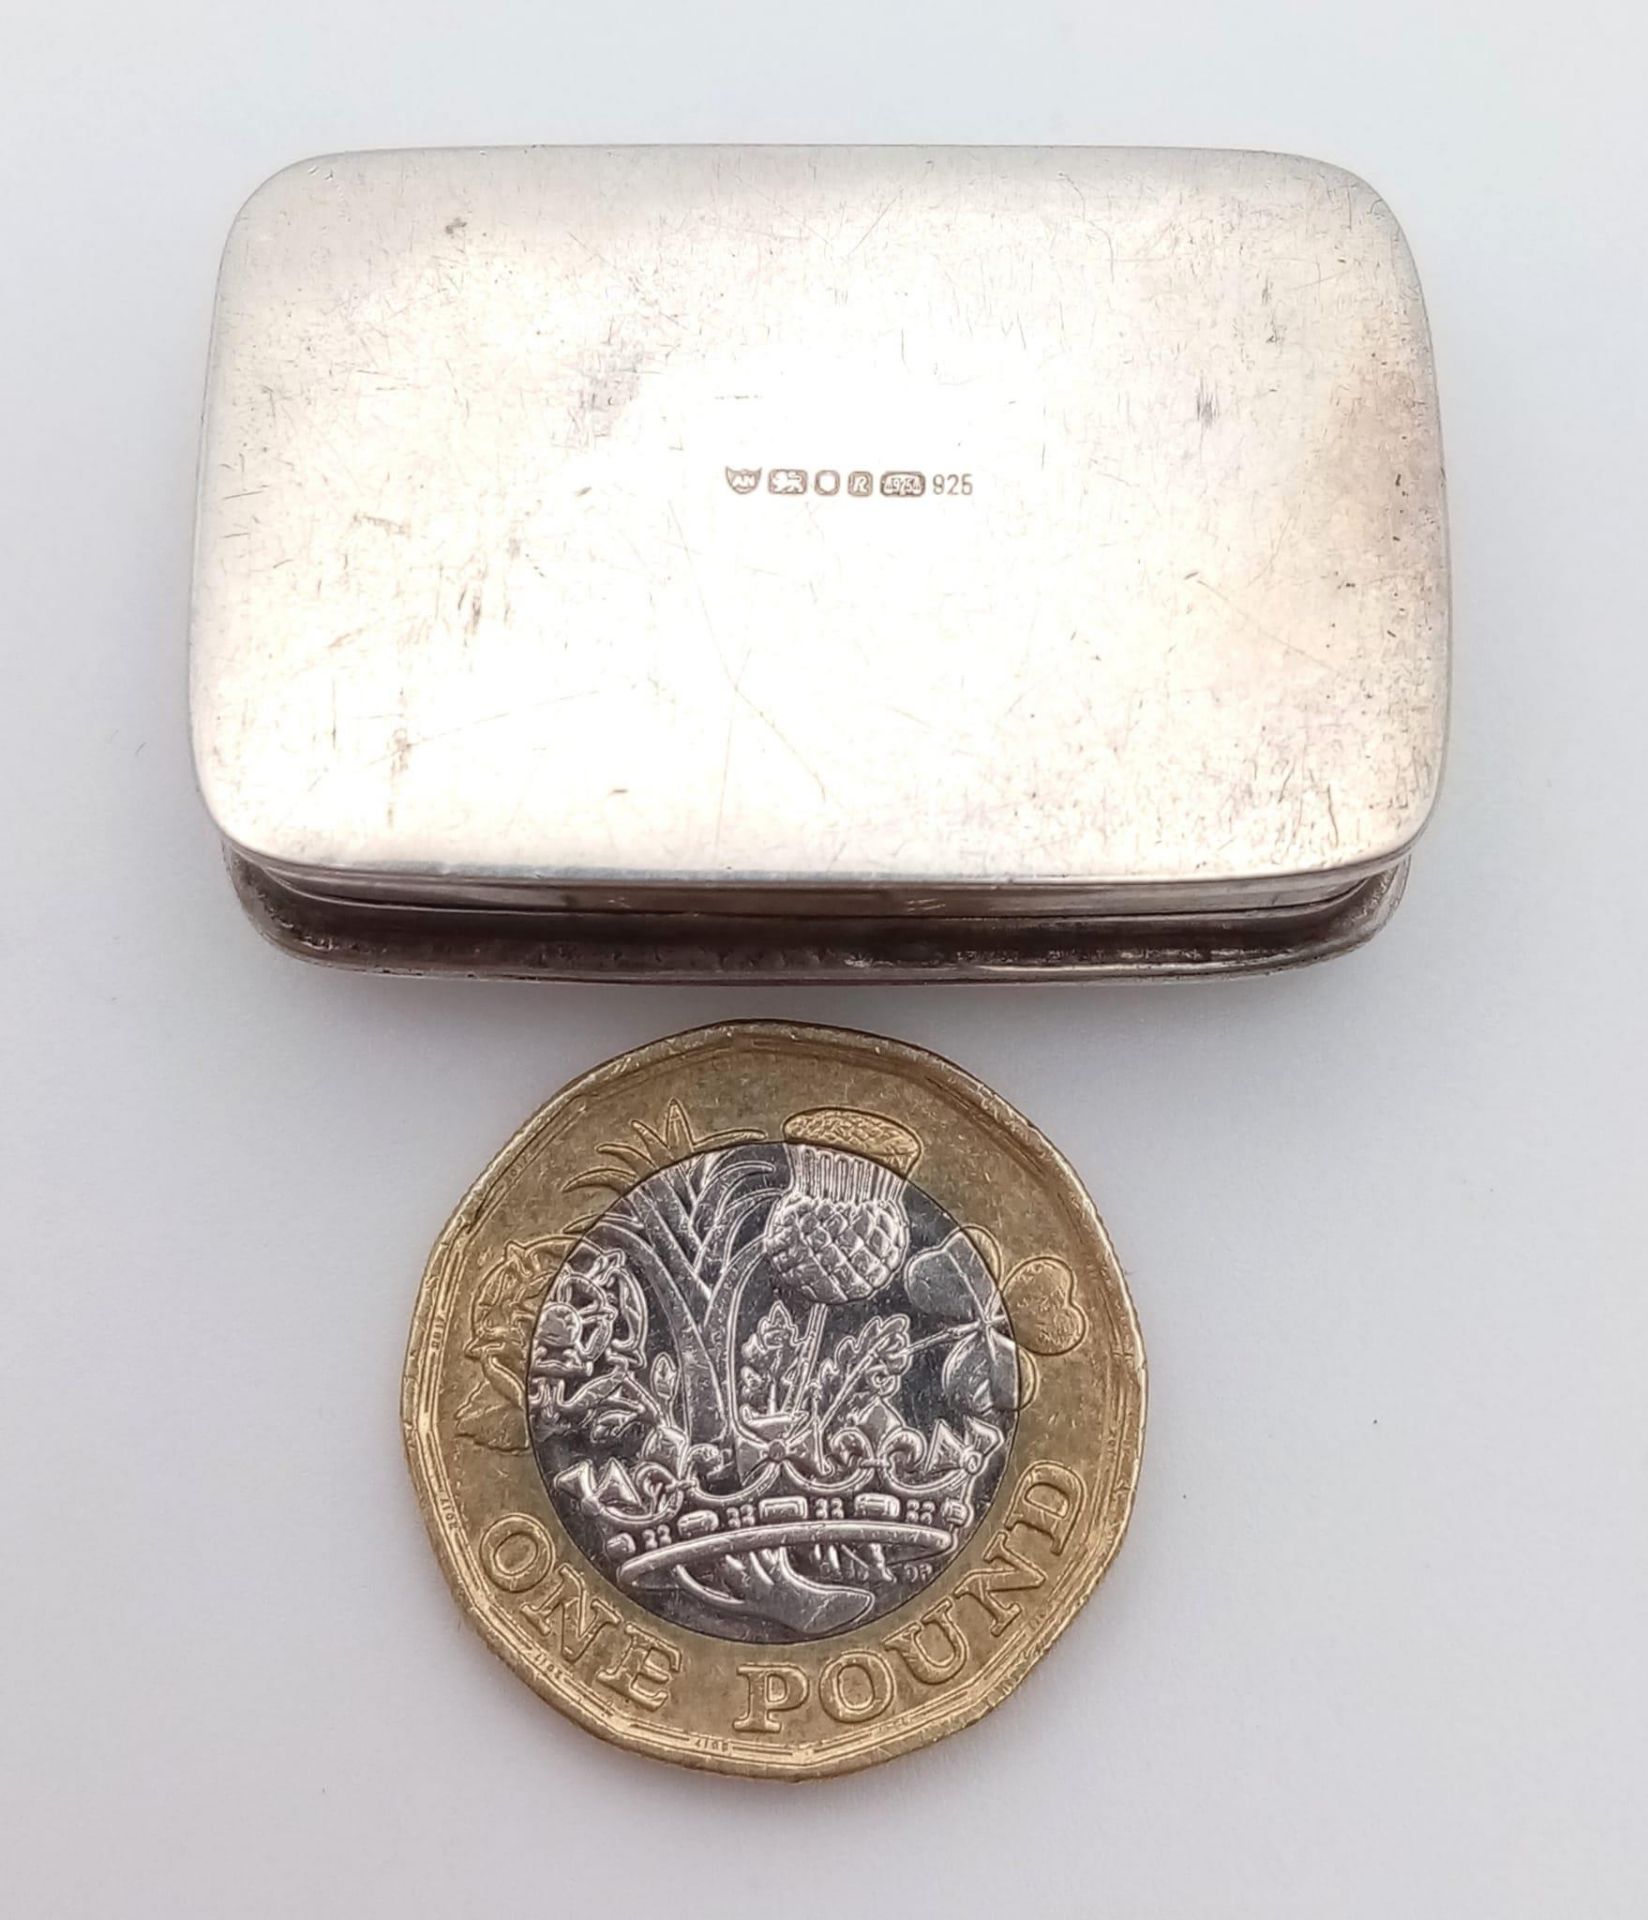 A Vintage Pin/Pill Silver Box with a Pair of Ornate Decorative Theatre Masks on Lid. 4 x 2.5cm. - Image 3 of 4